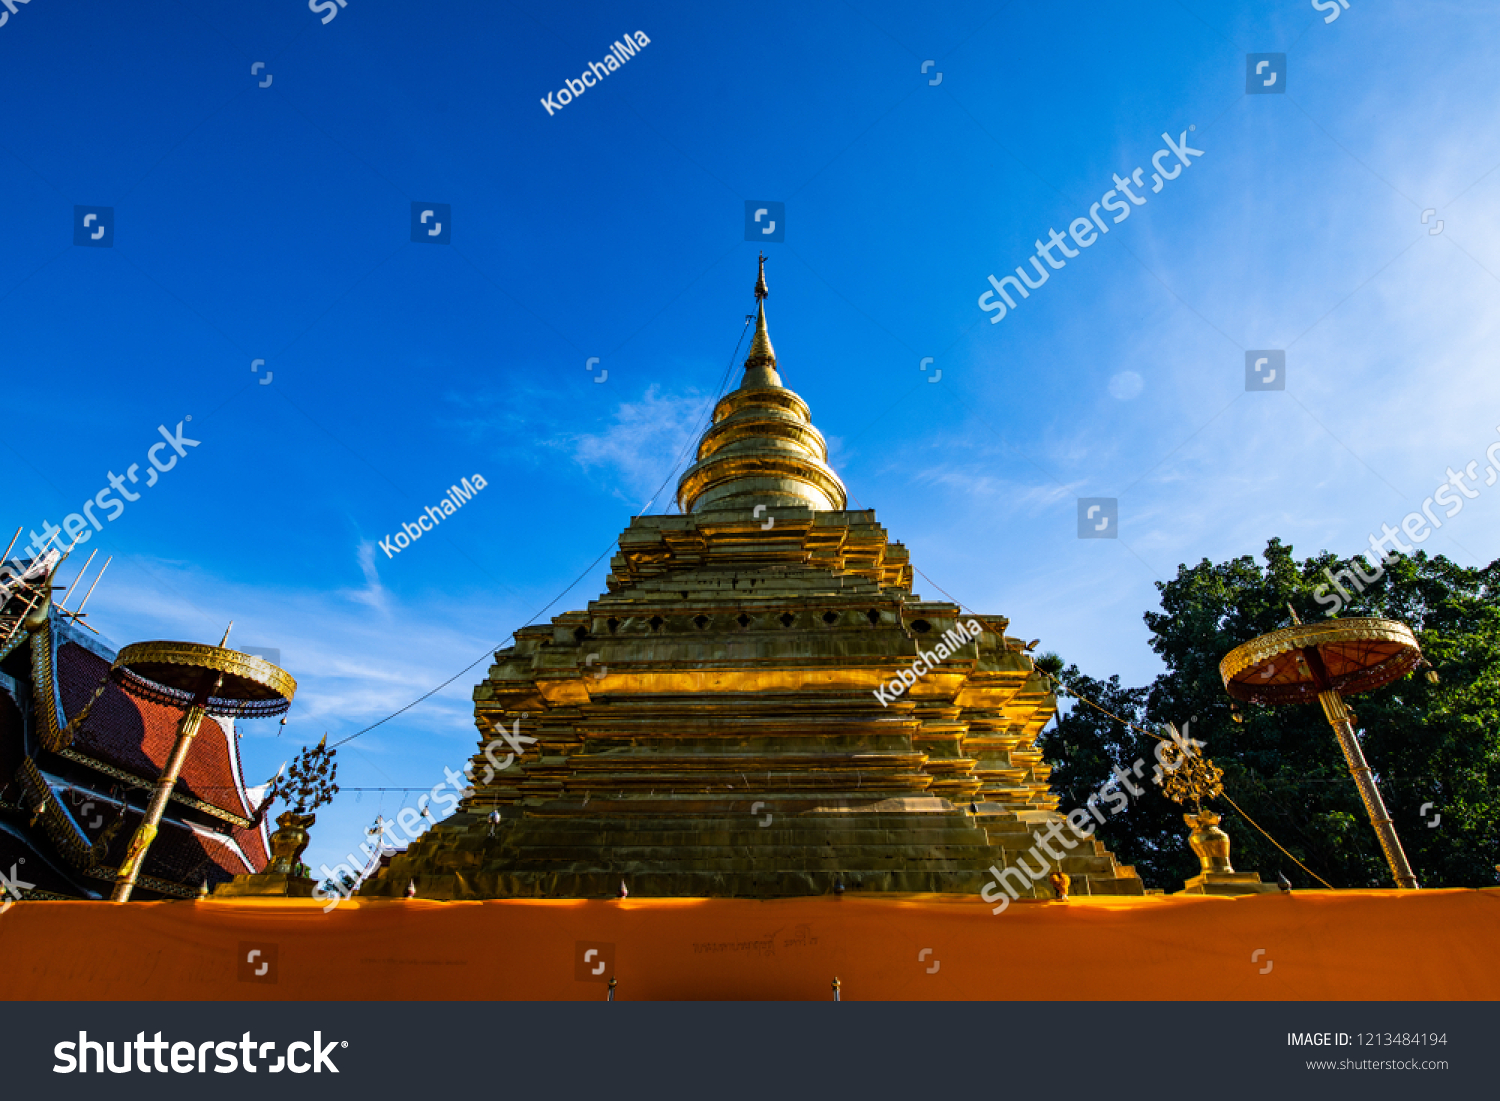 Phra That Si Chom Thong Worawihan temple in Chiangmai province, Thailand. #1213484194